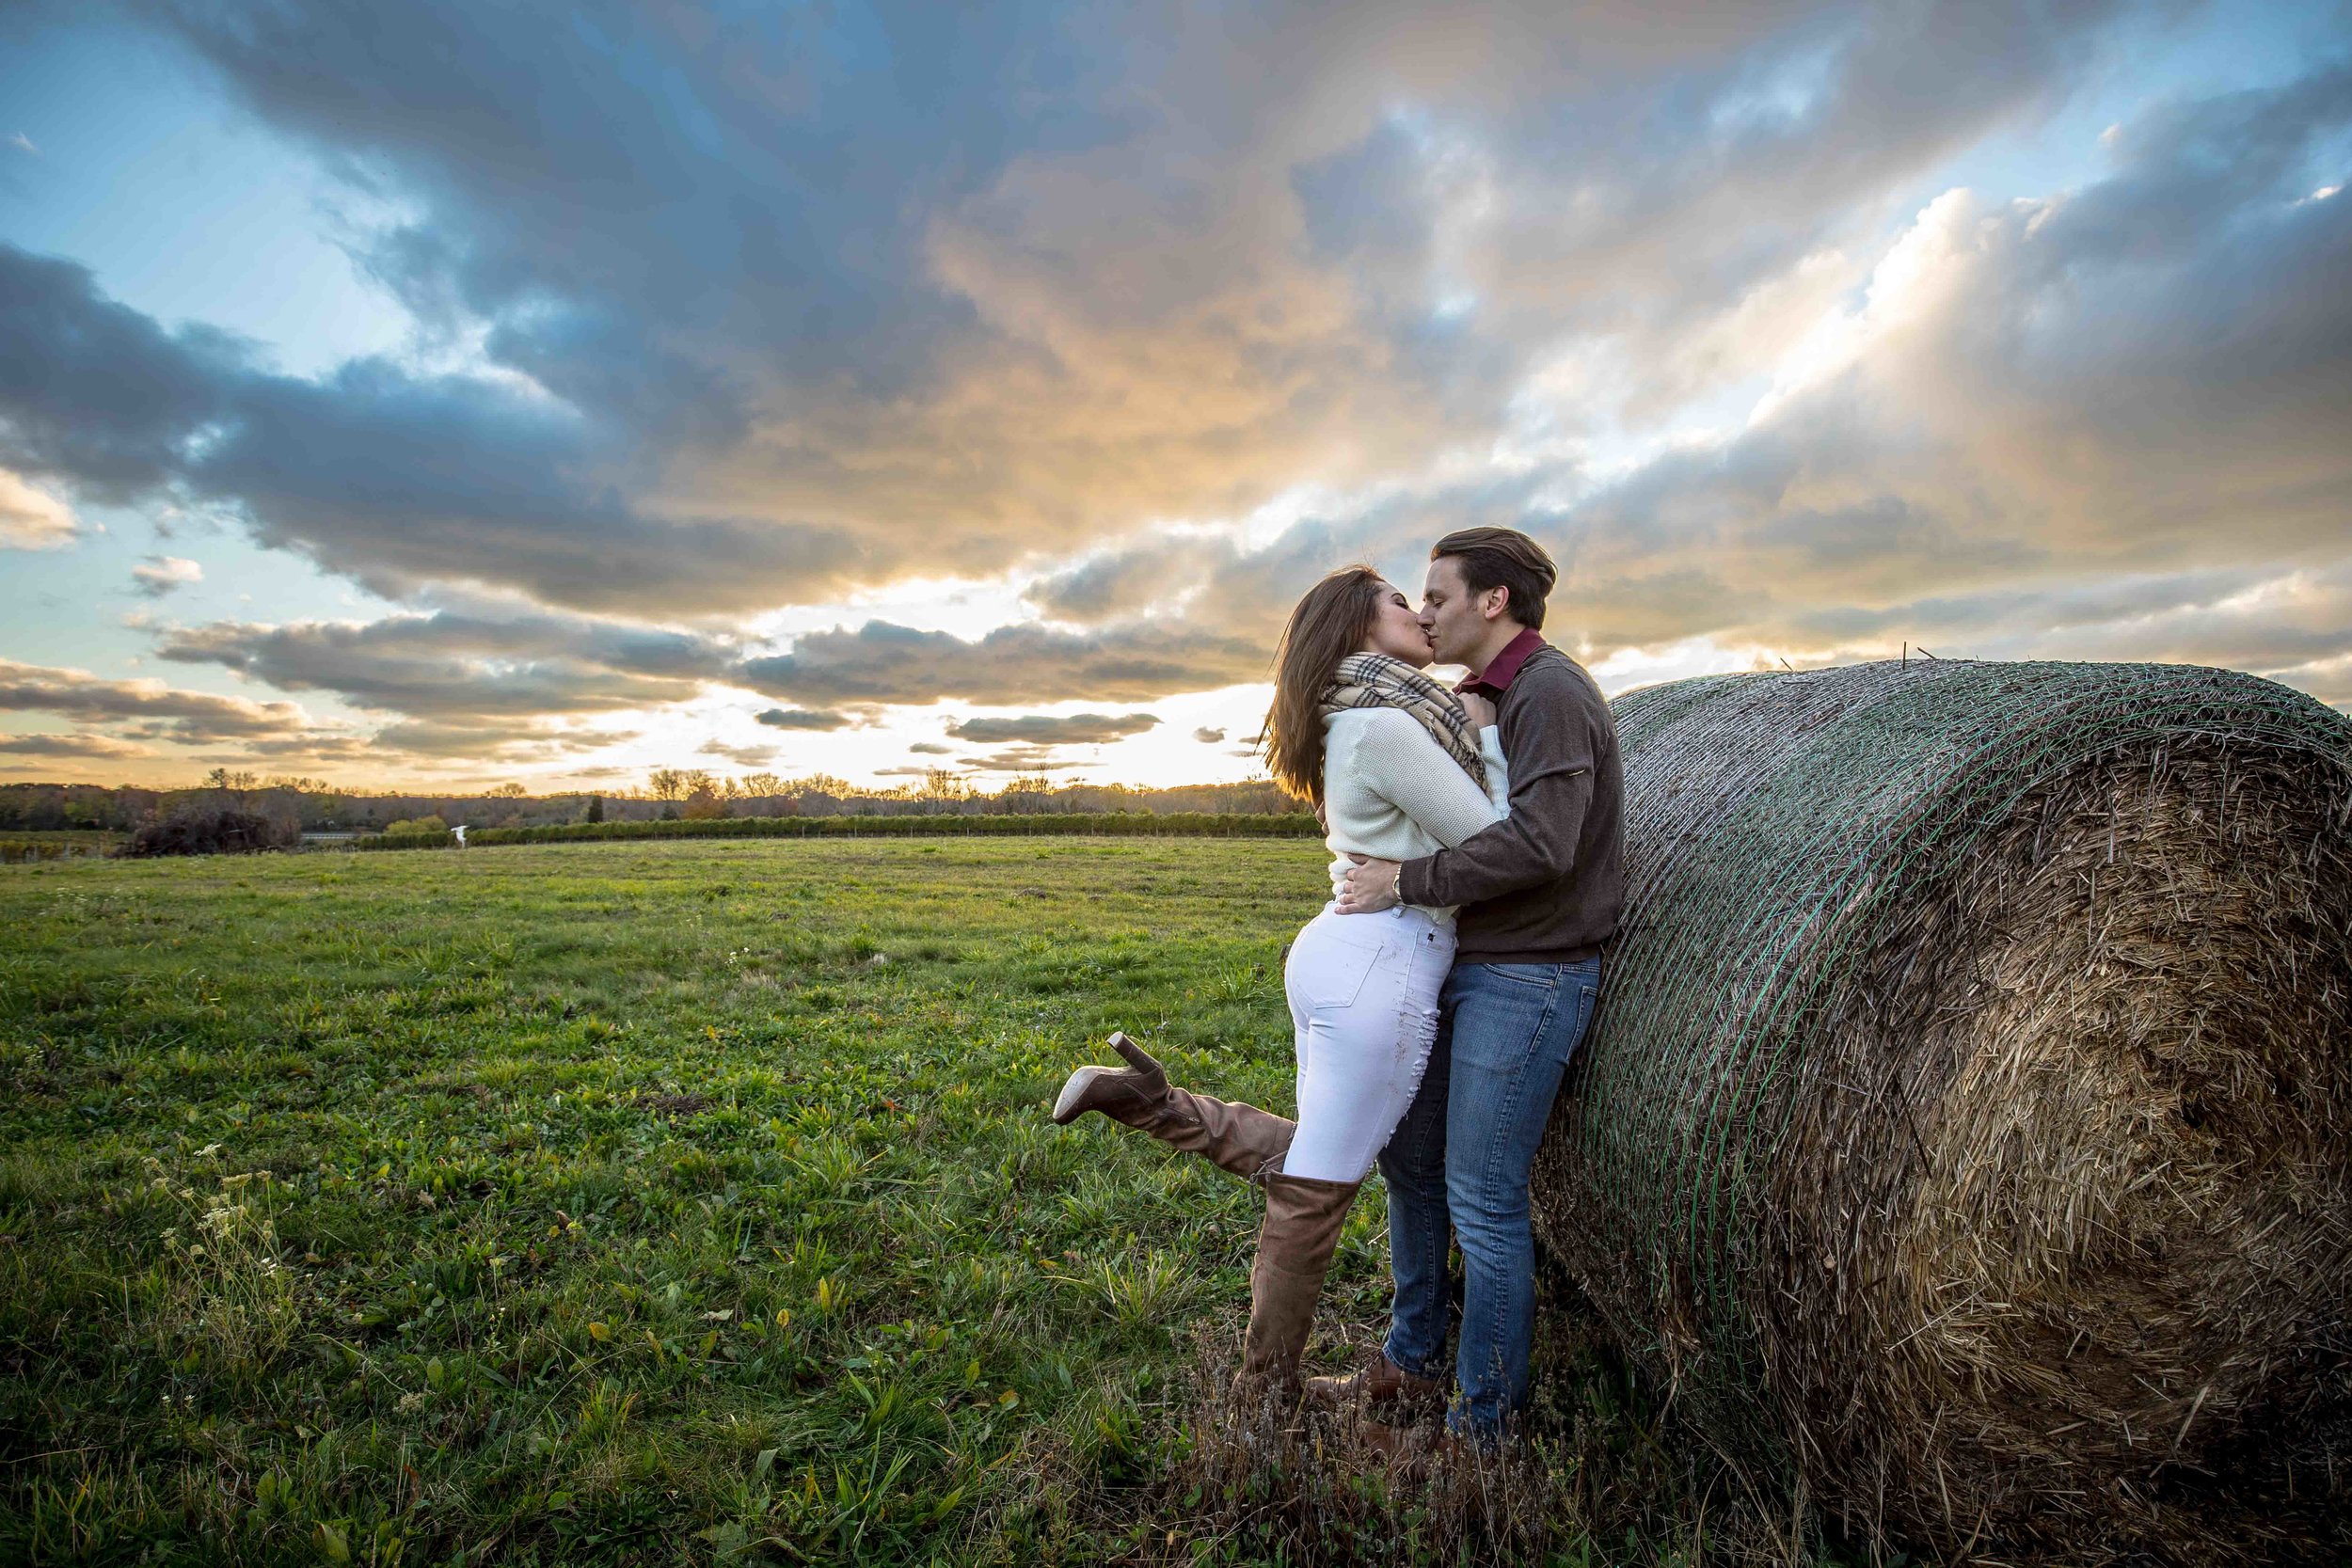  Leaning on hay bale with a leg kick kiss and a setting sun 